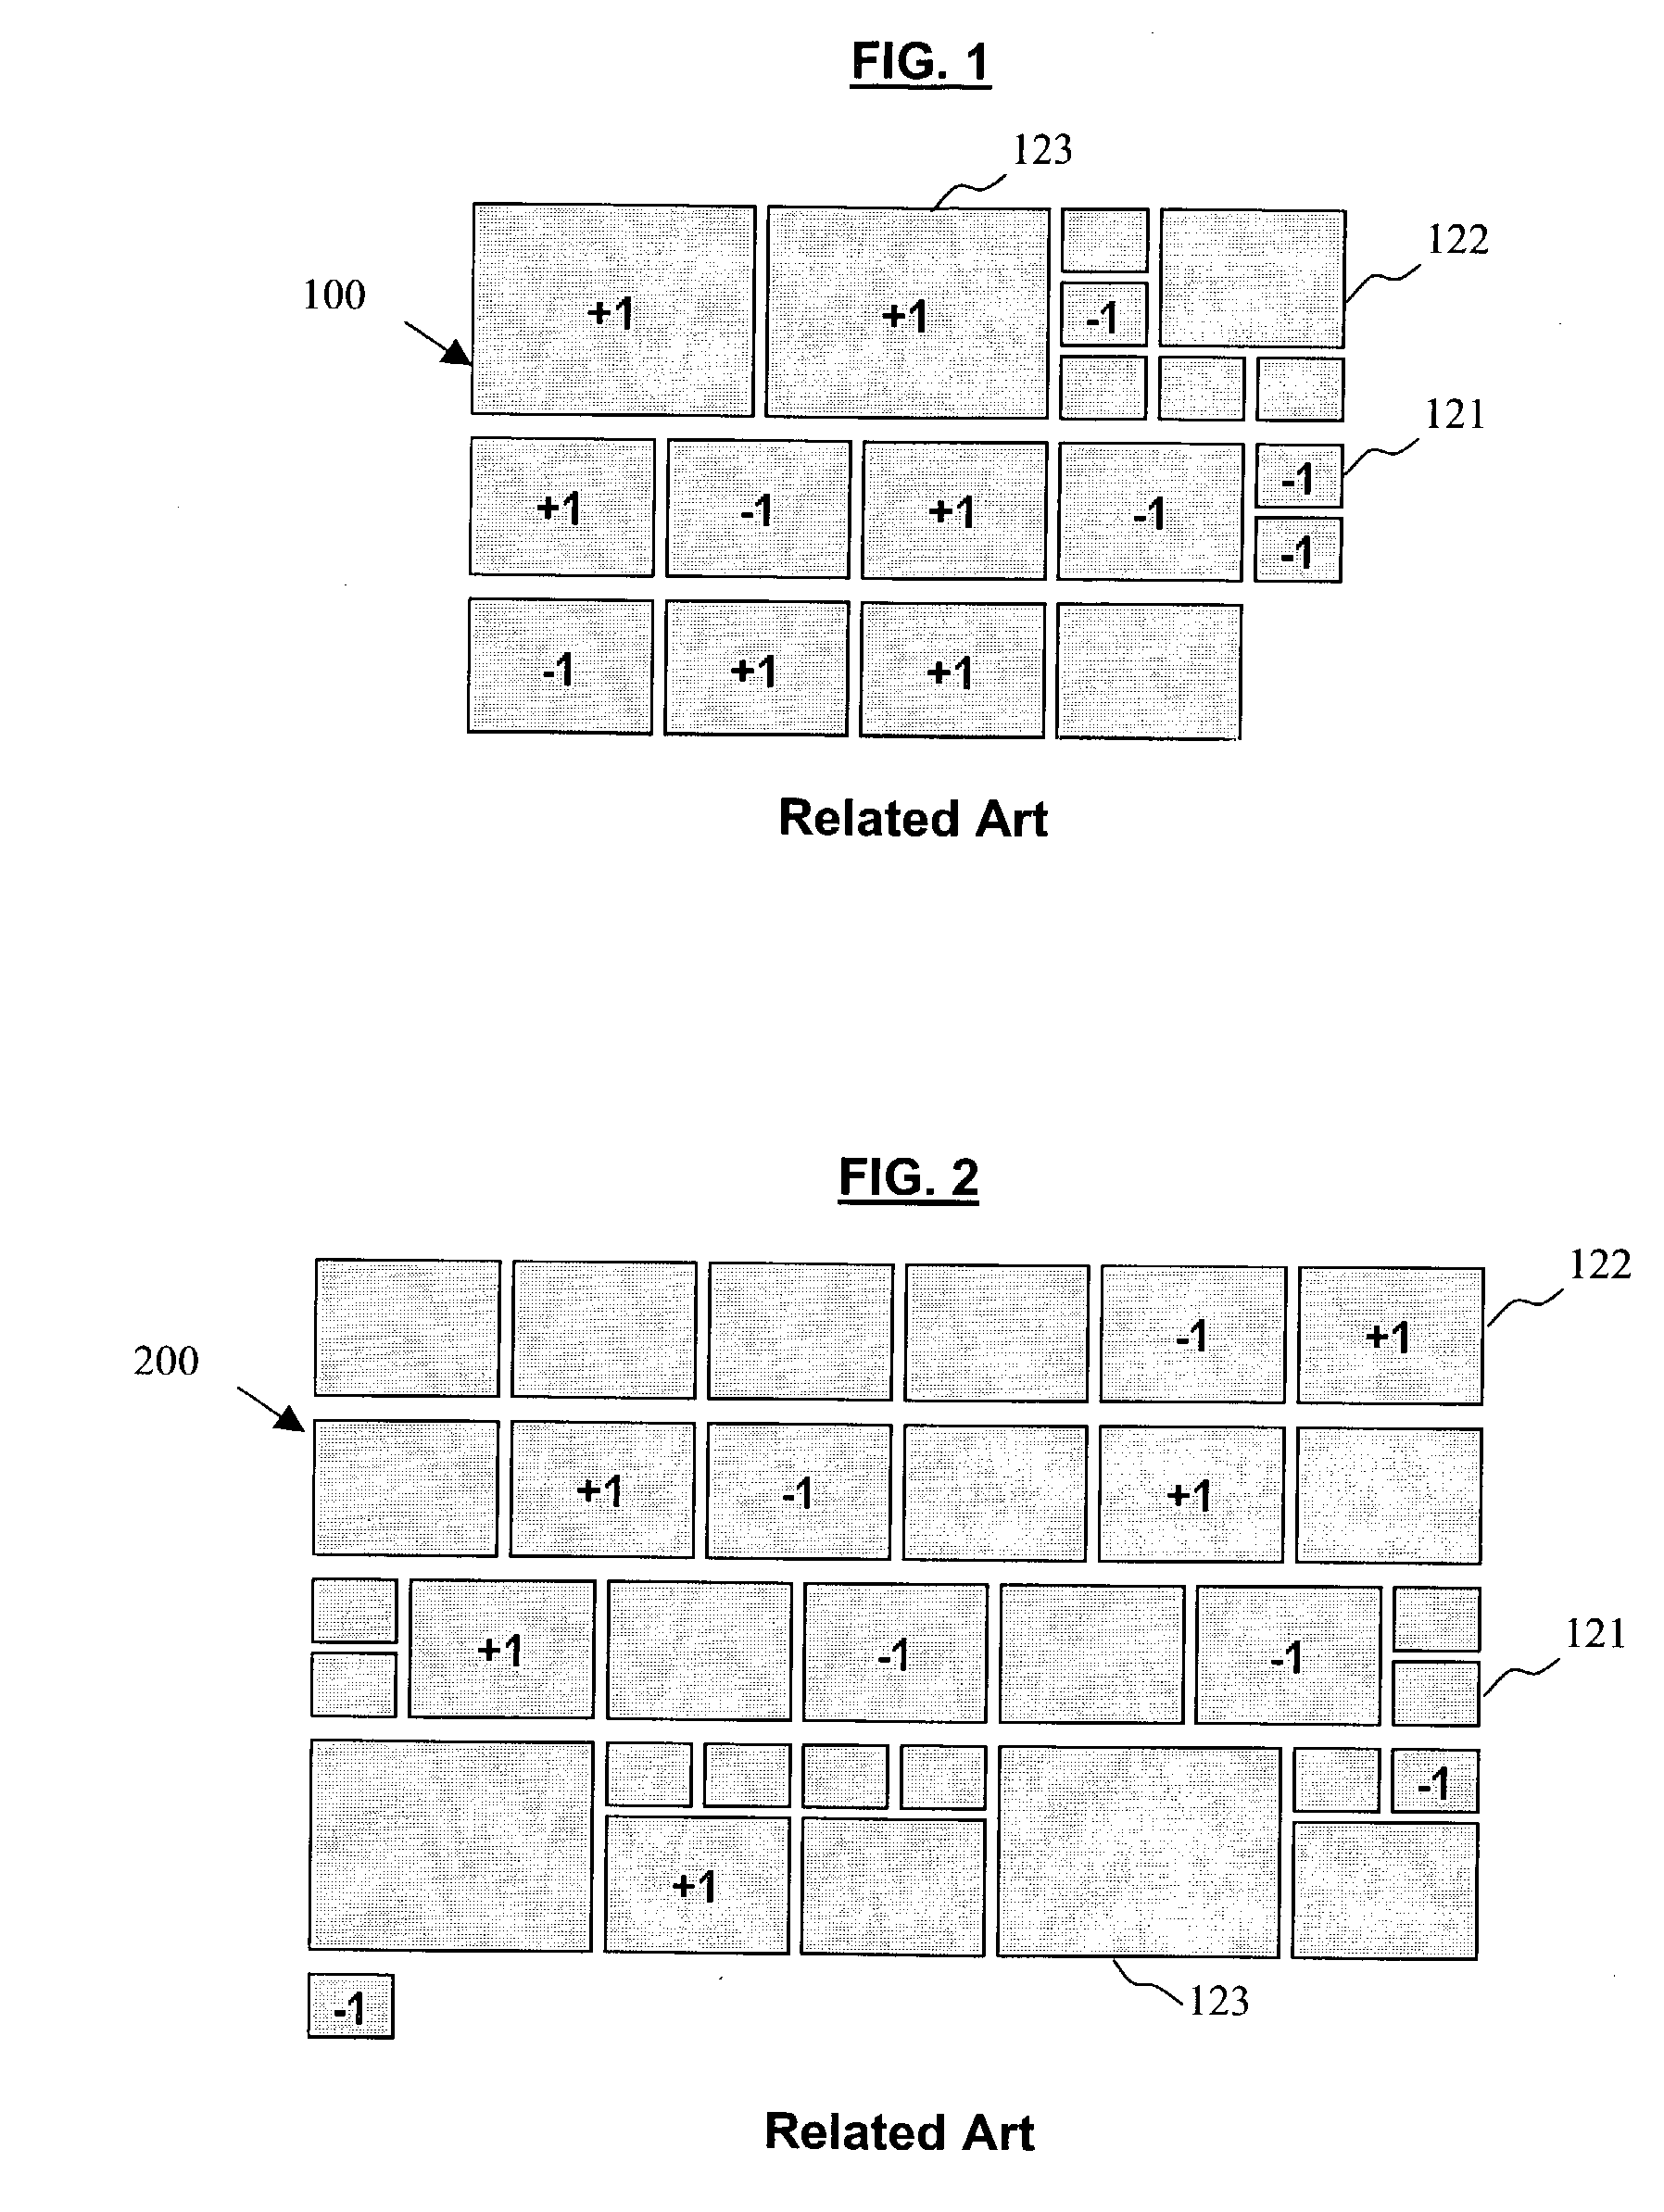 Systems and methods for generating video summary image layouts